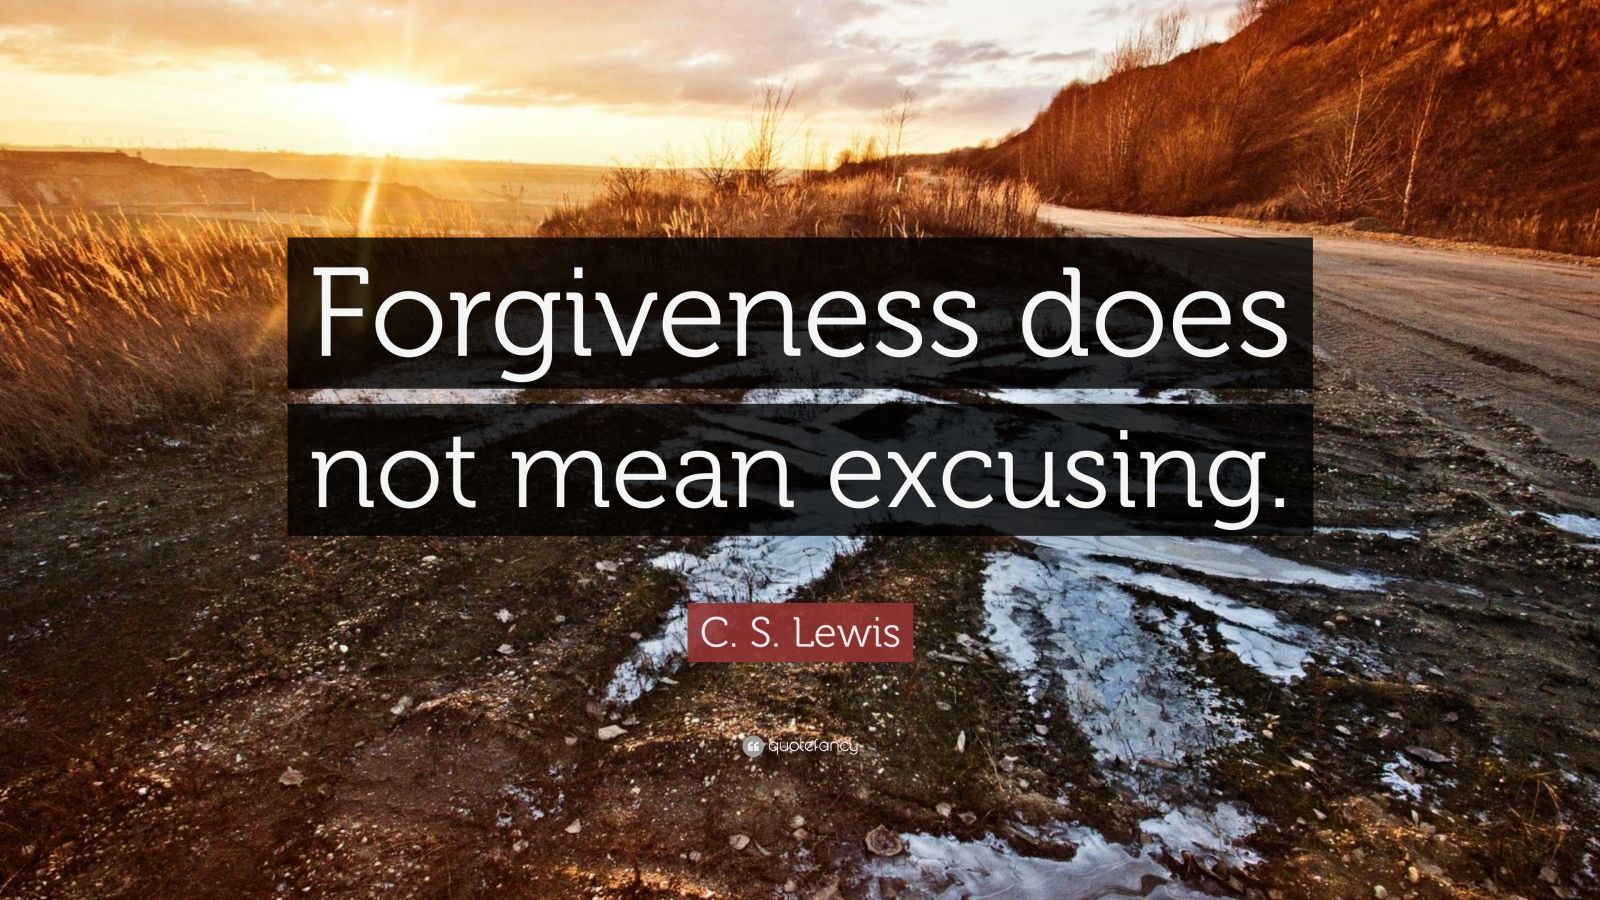 C. S. Lewis Quote: “Forgiveness does not mean excusing.”